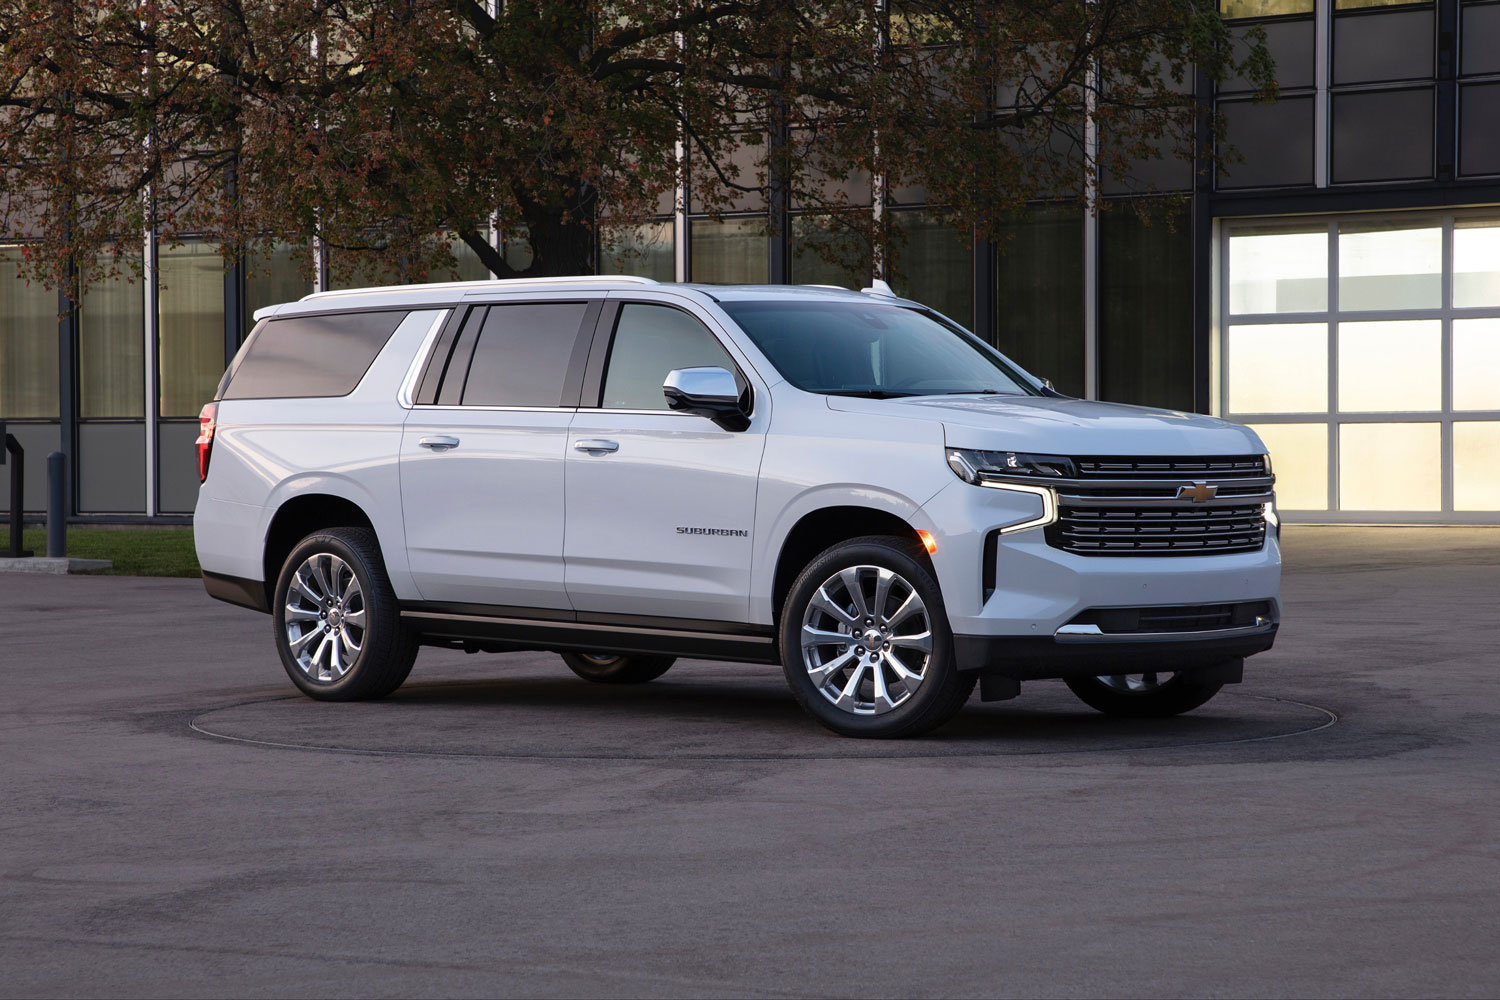 2022 Chevrolet Suburban Reviews, Price, MPG and More | Capital One Auto  Navigator